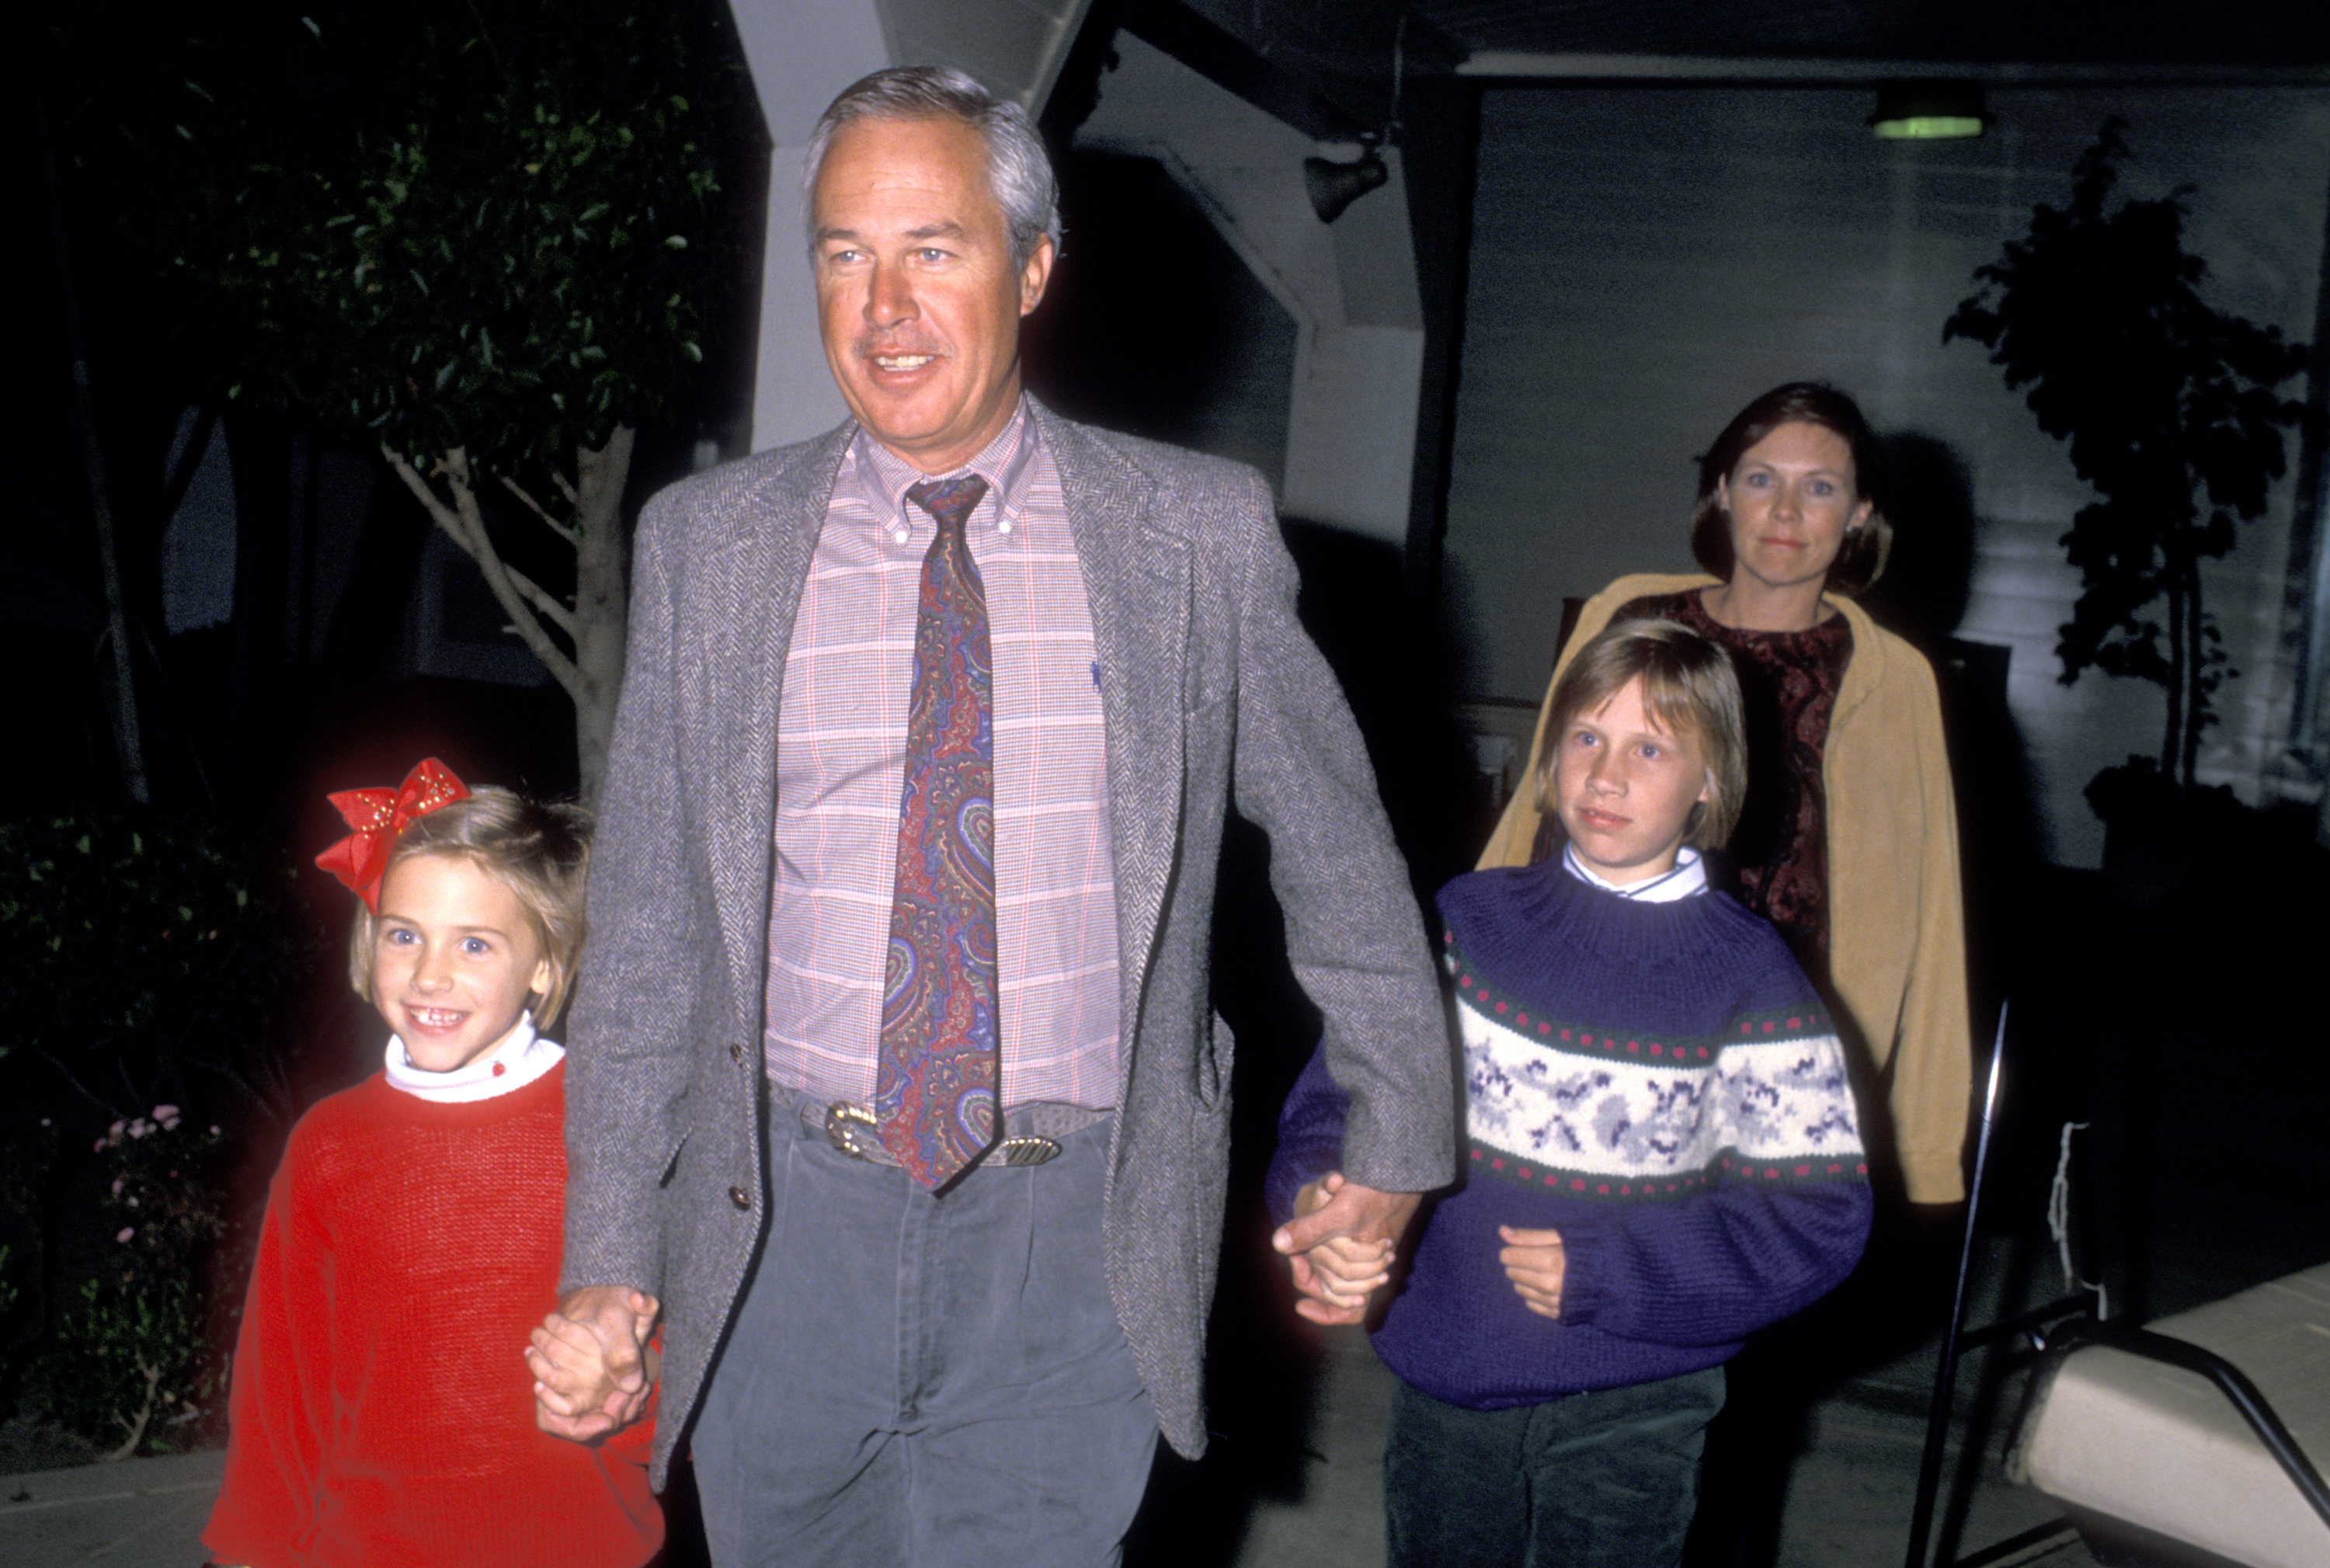 Actor Steve Kanaly, his wife Brent Power, and daughters on November 12, 1988, sighting at Los Angeles Equestrian Center in Burbank, California. | Source: Getty Images